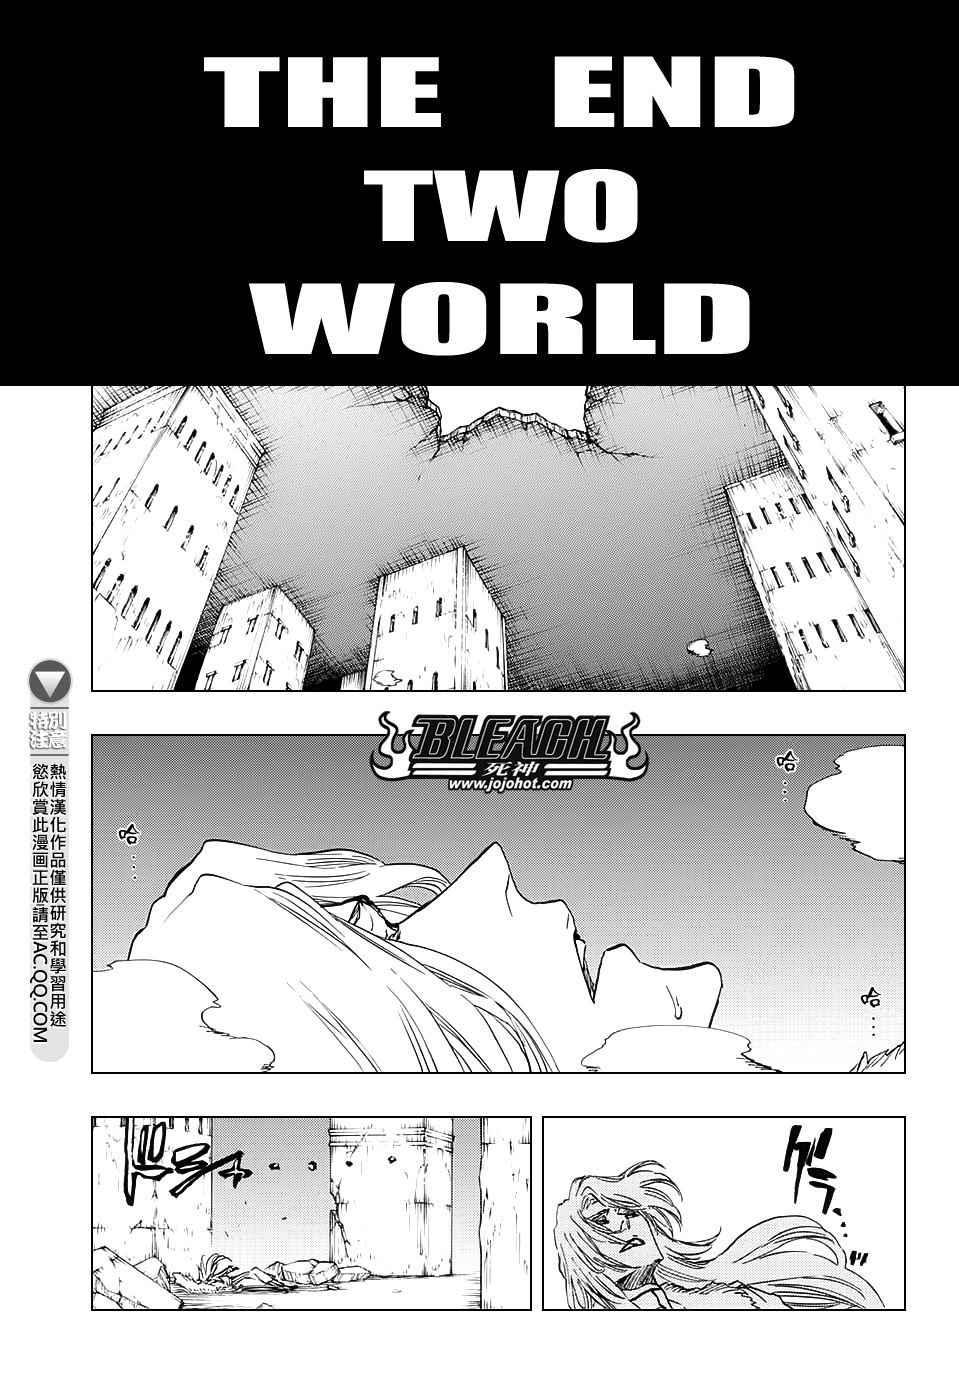 681 THE END TWO WORLD